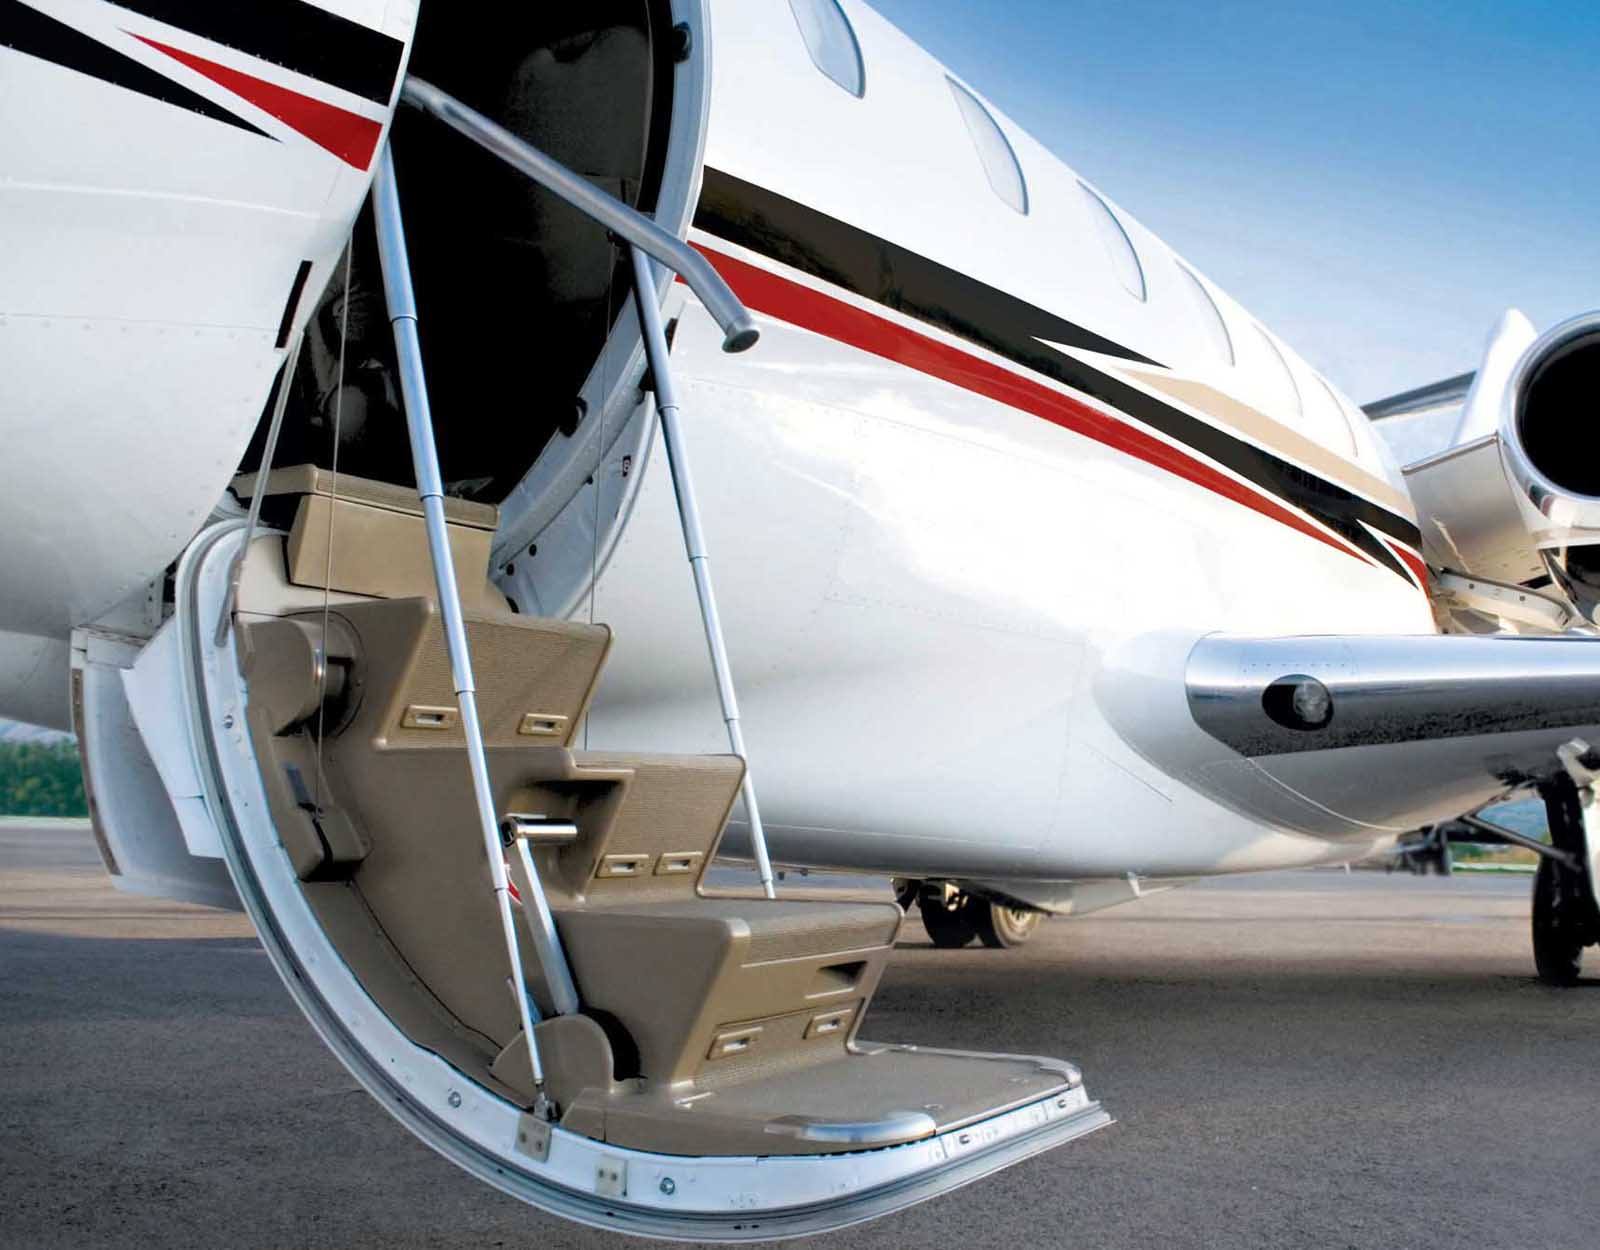 Trusted aircraft management company services in AZ